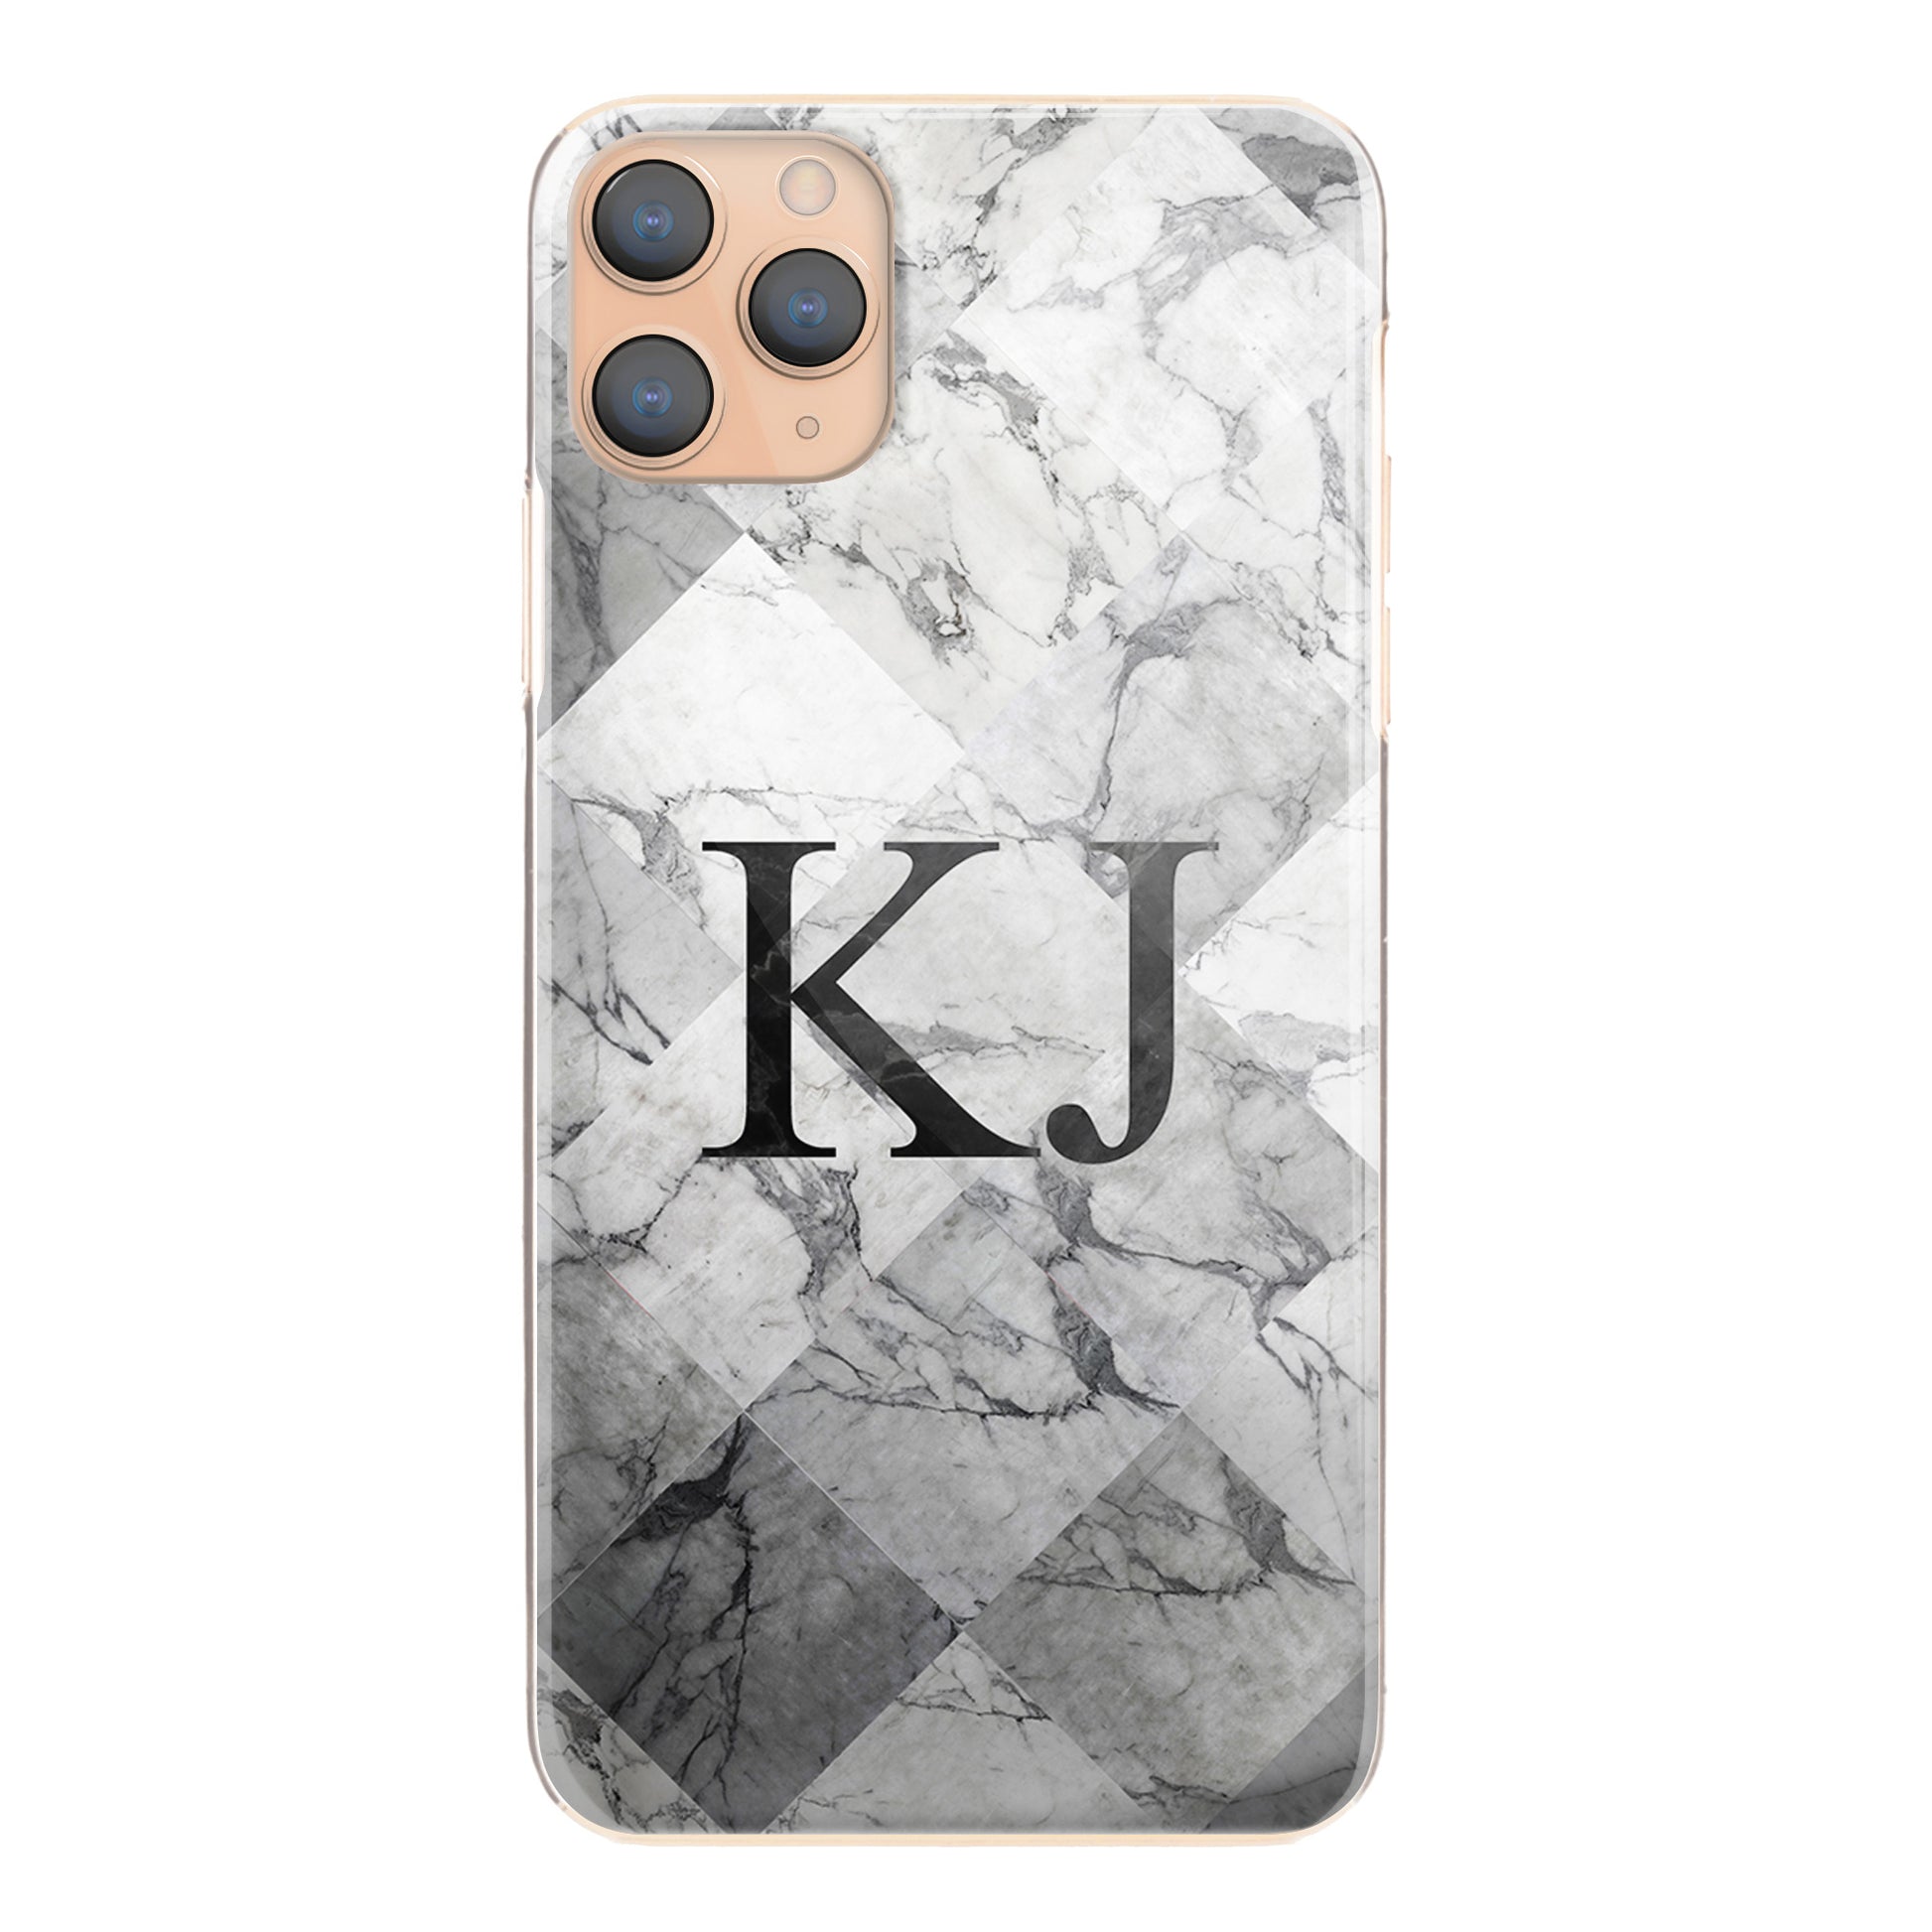 Personalised Oppo Phone Hard Case with Traditional Initials on Patterned Grey Marble